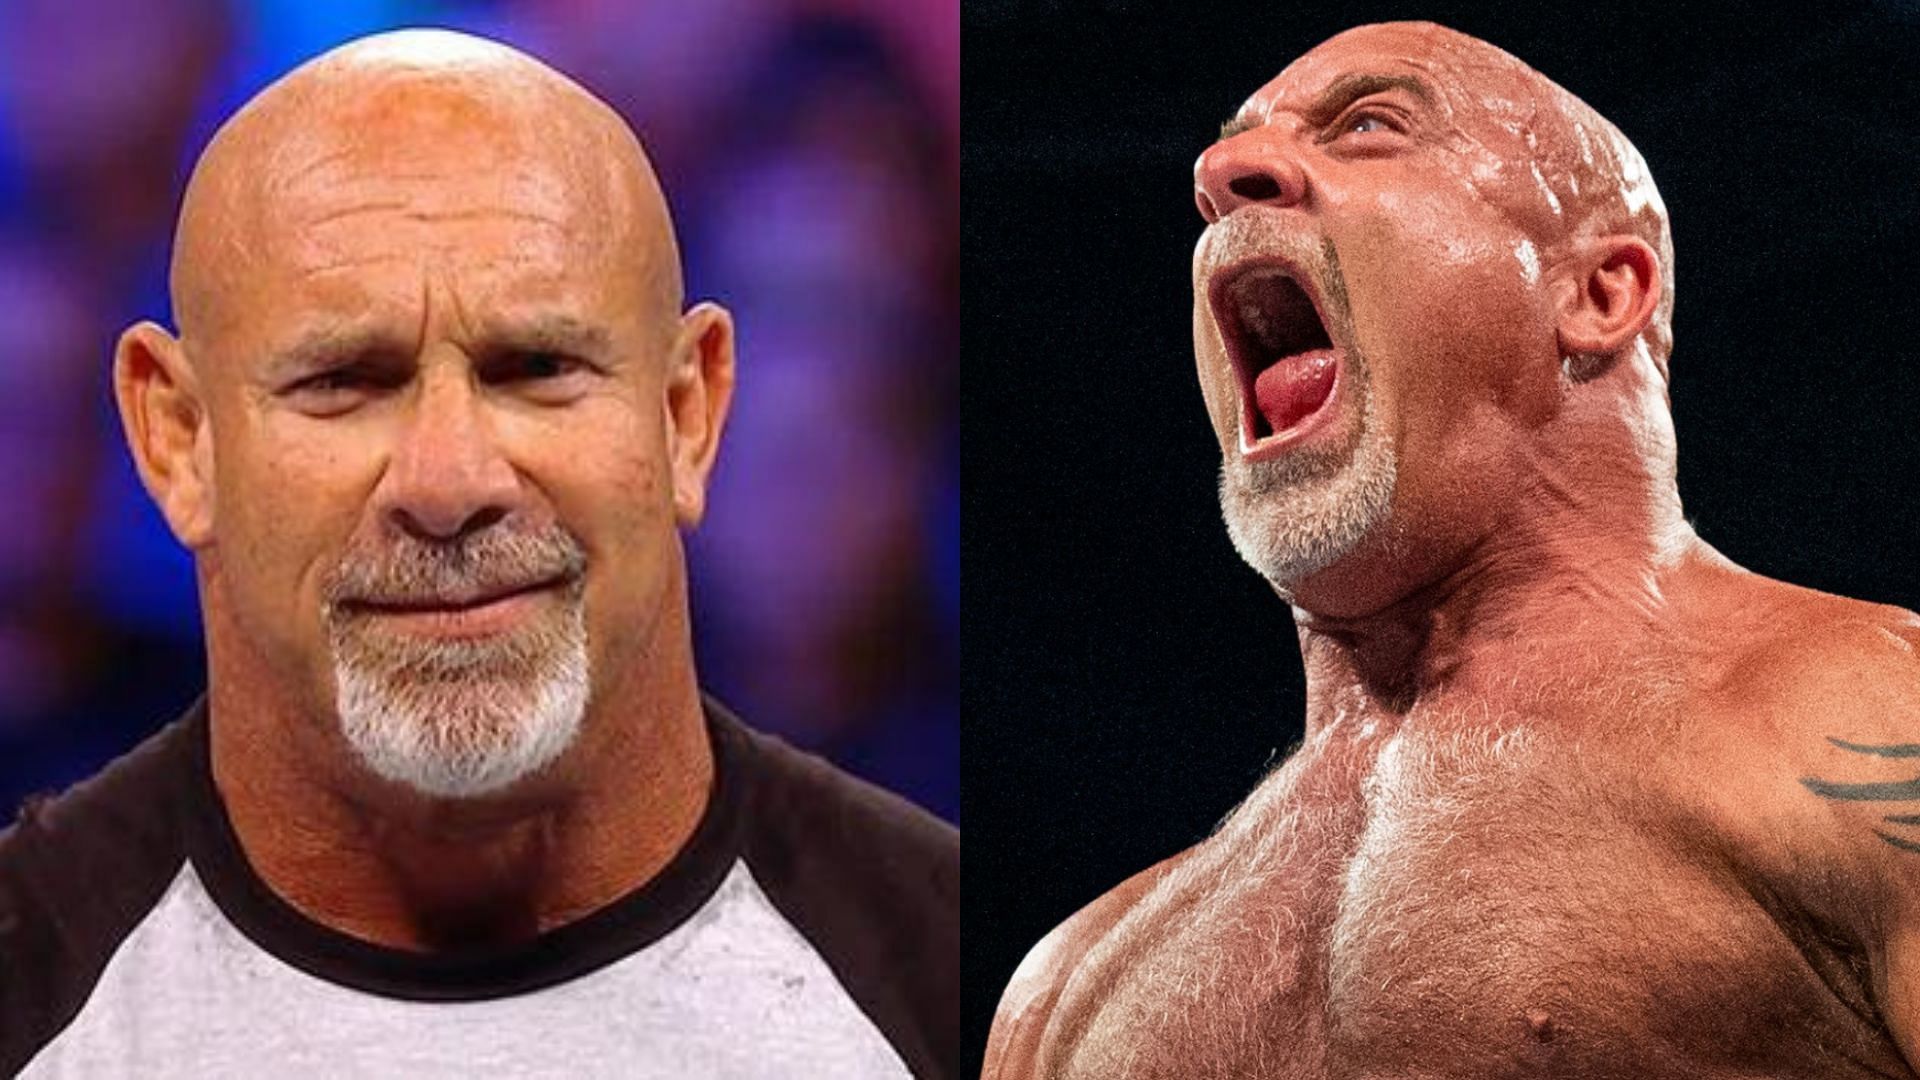 Goldberg wants to have a retirement match. 